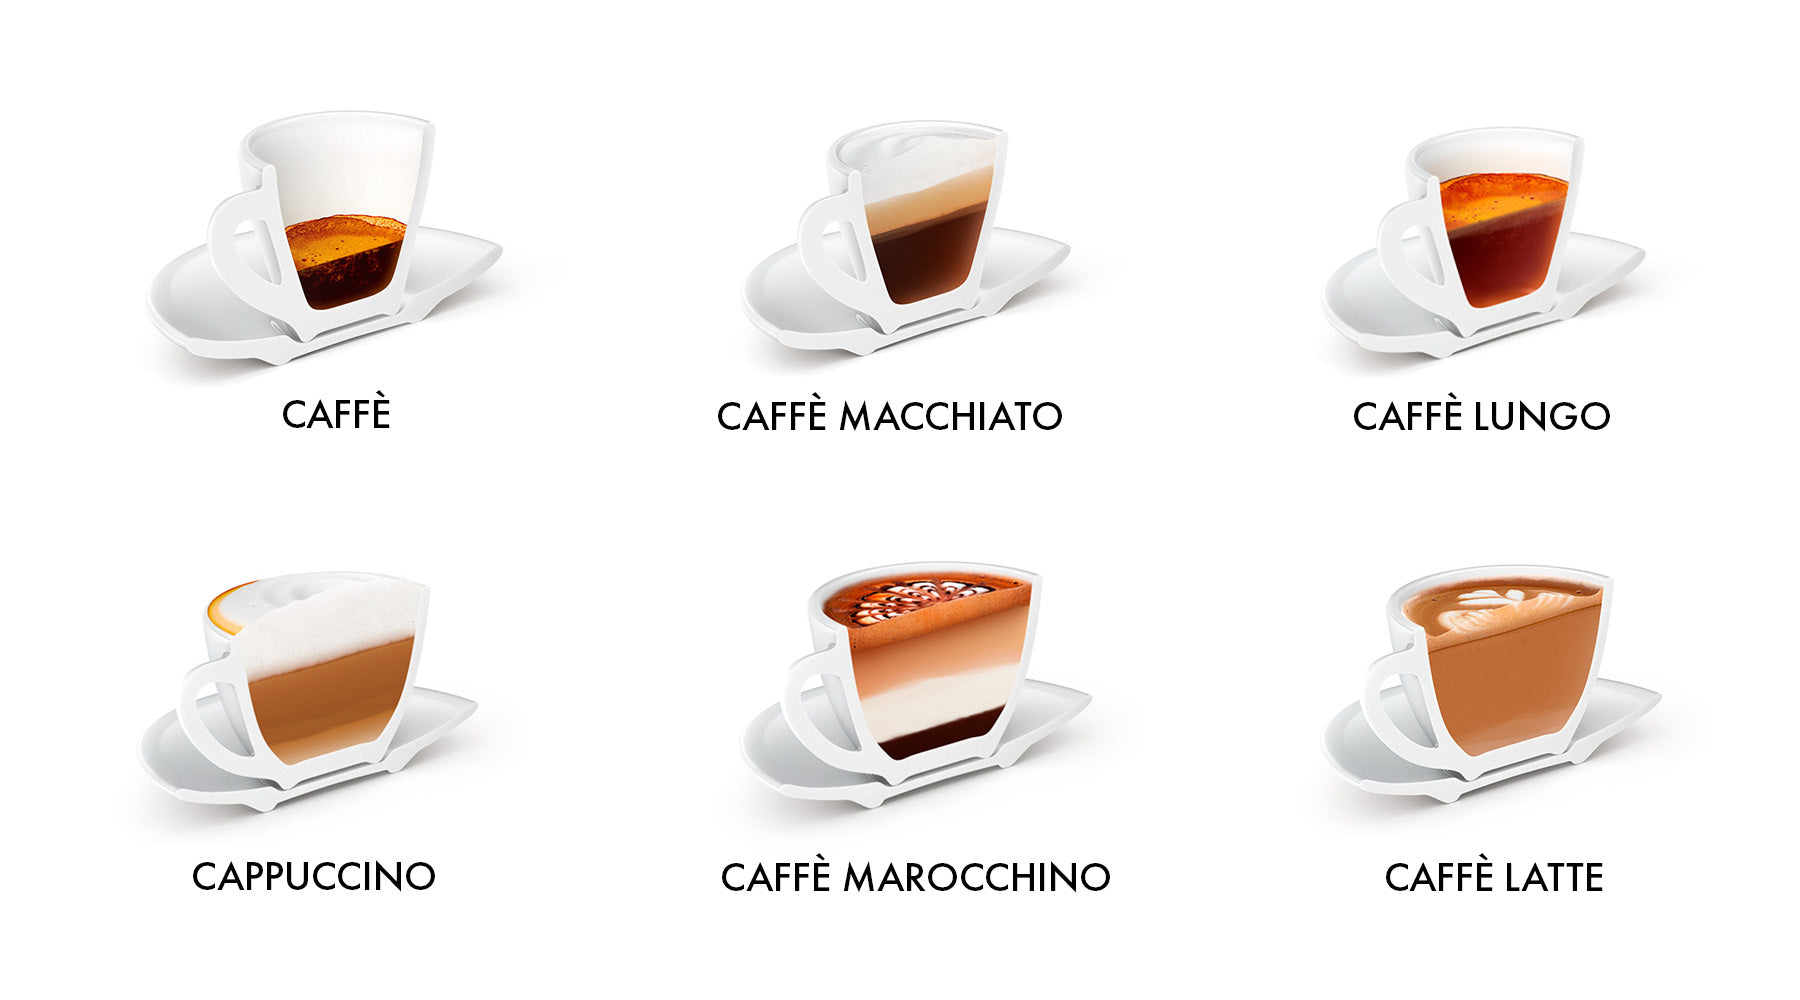 Is That Cappuccino You're Drinking Really a Cappuccino? - The New York Times